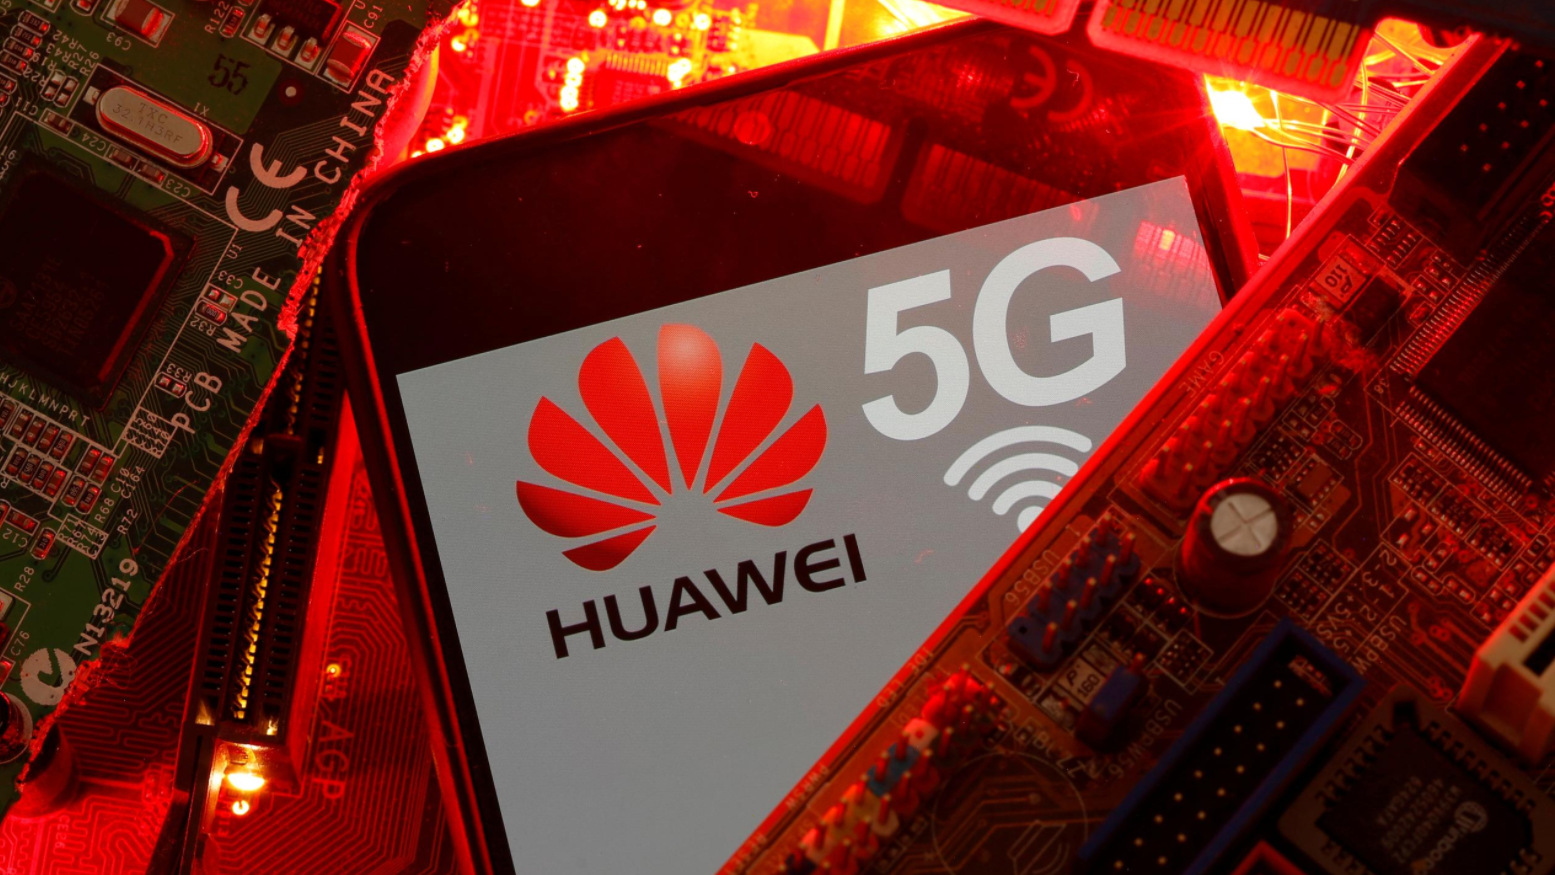 What is the 5G networks? Does China really use Huawei as a “Trojan horse”?